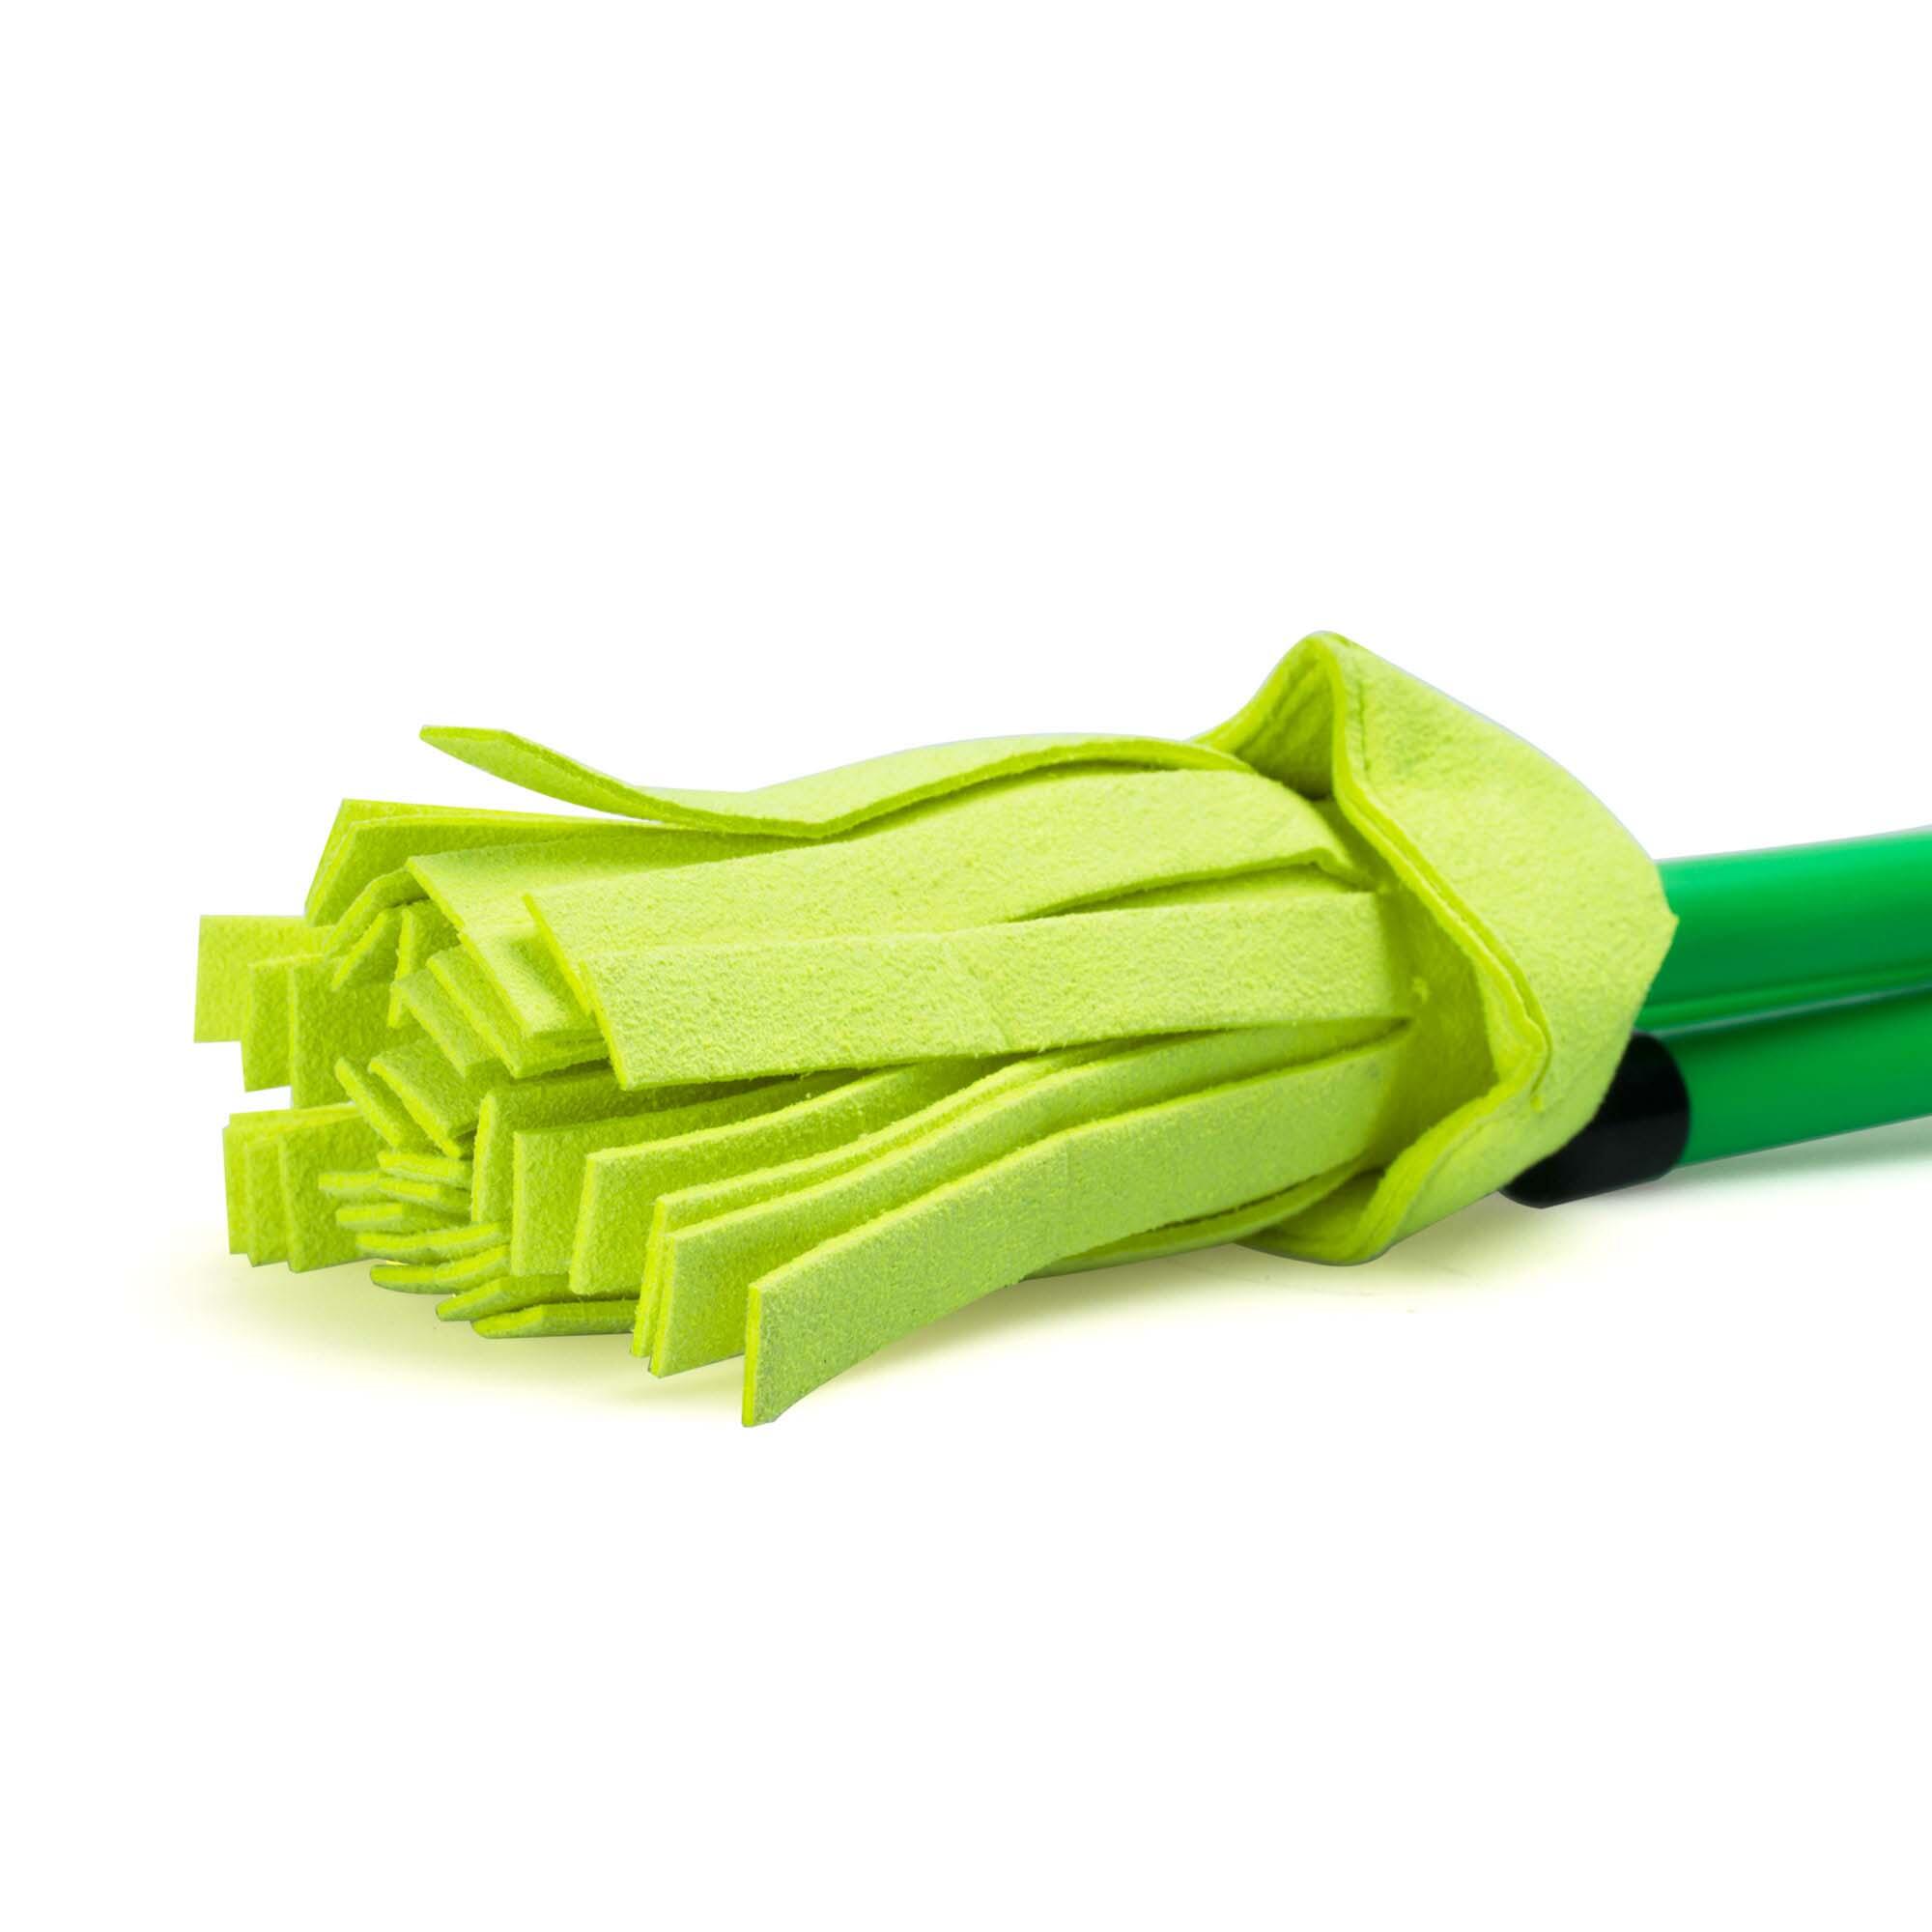 Neo Fluoro Flower Stick and Hand Sticks-Green with Yellow Tassels 3/3